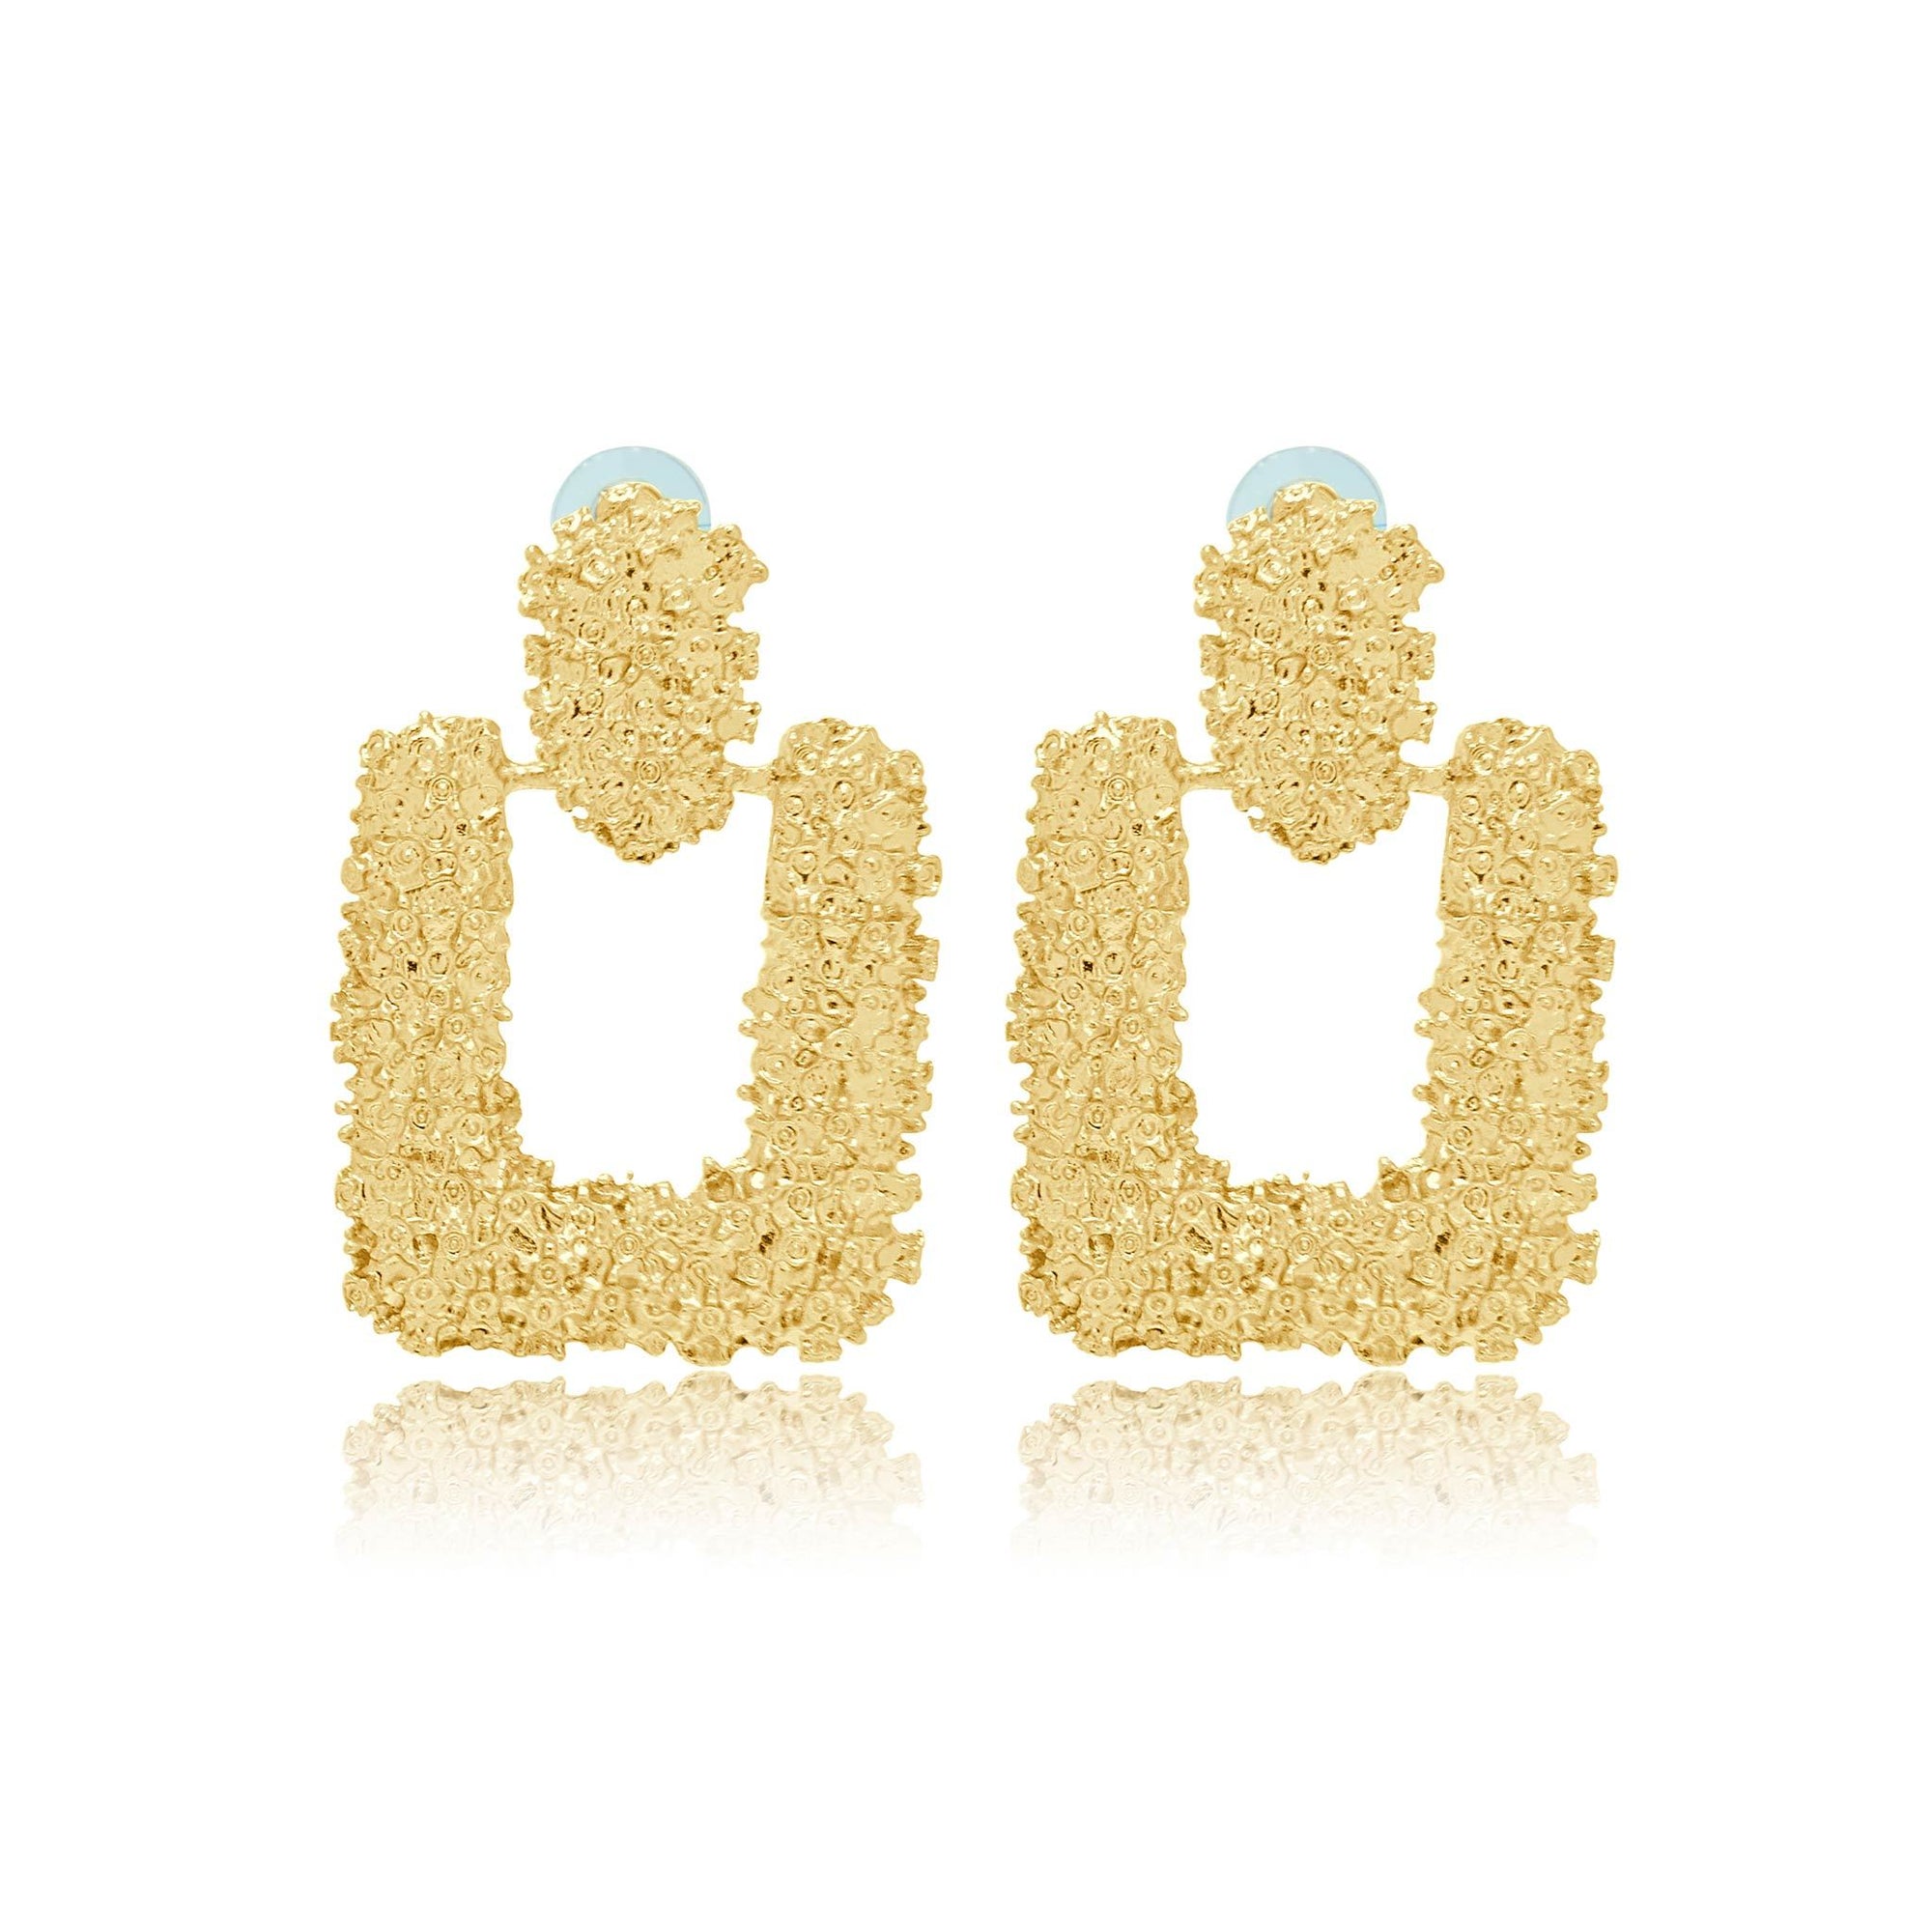 Serena textured gold effect statement earrings